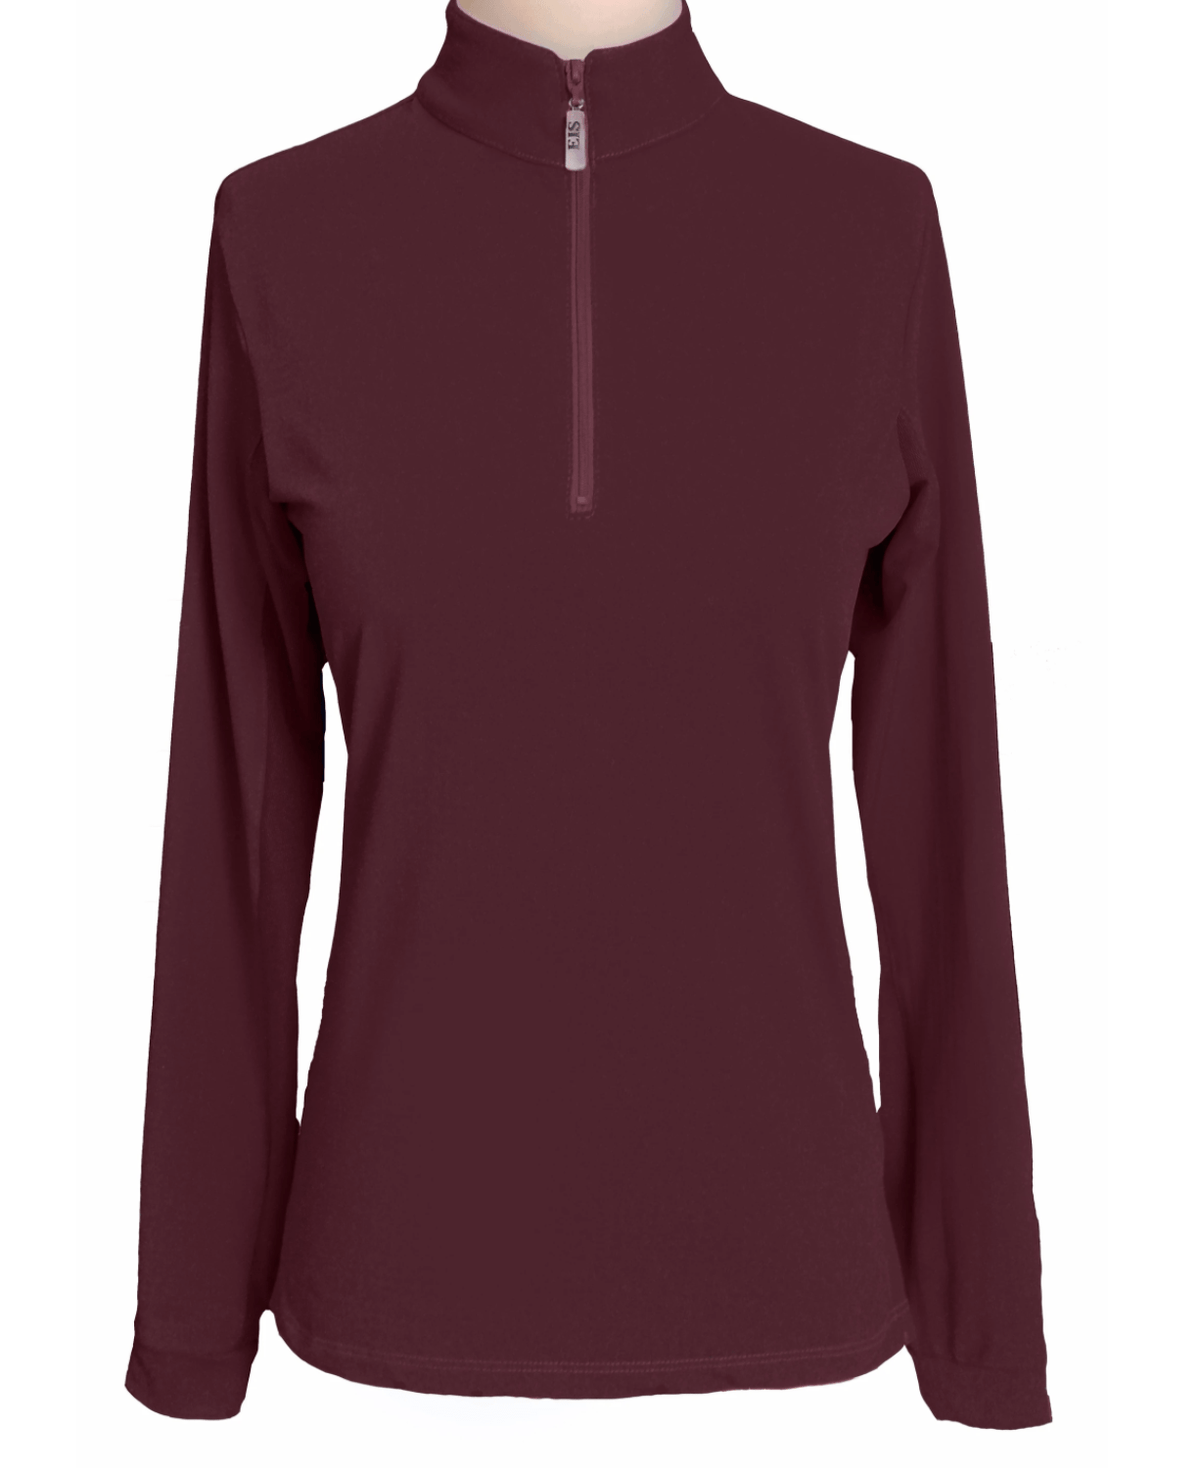 EIS Youth Shirt Maroon EIS- Sun Shirts Youth Medium 6-8 equestrian team apparel online tack store mobile tack store custom farm apparel custom show stable clothing equestrian lifestyle horse show clothing riding clothes ETA Kids Equestrian Fashion | EIS Sun Shirts horses equestrian tack store